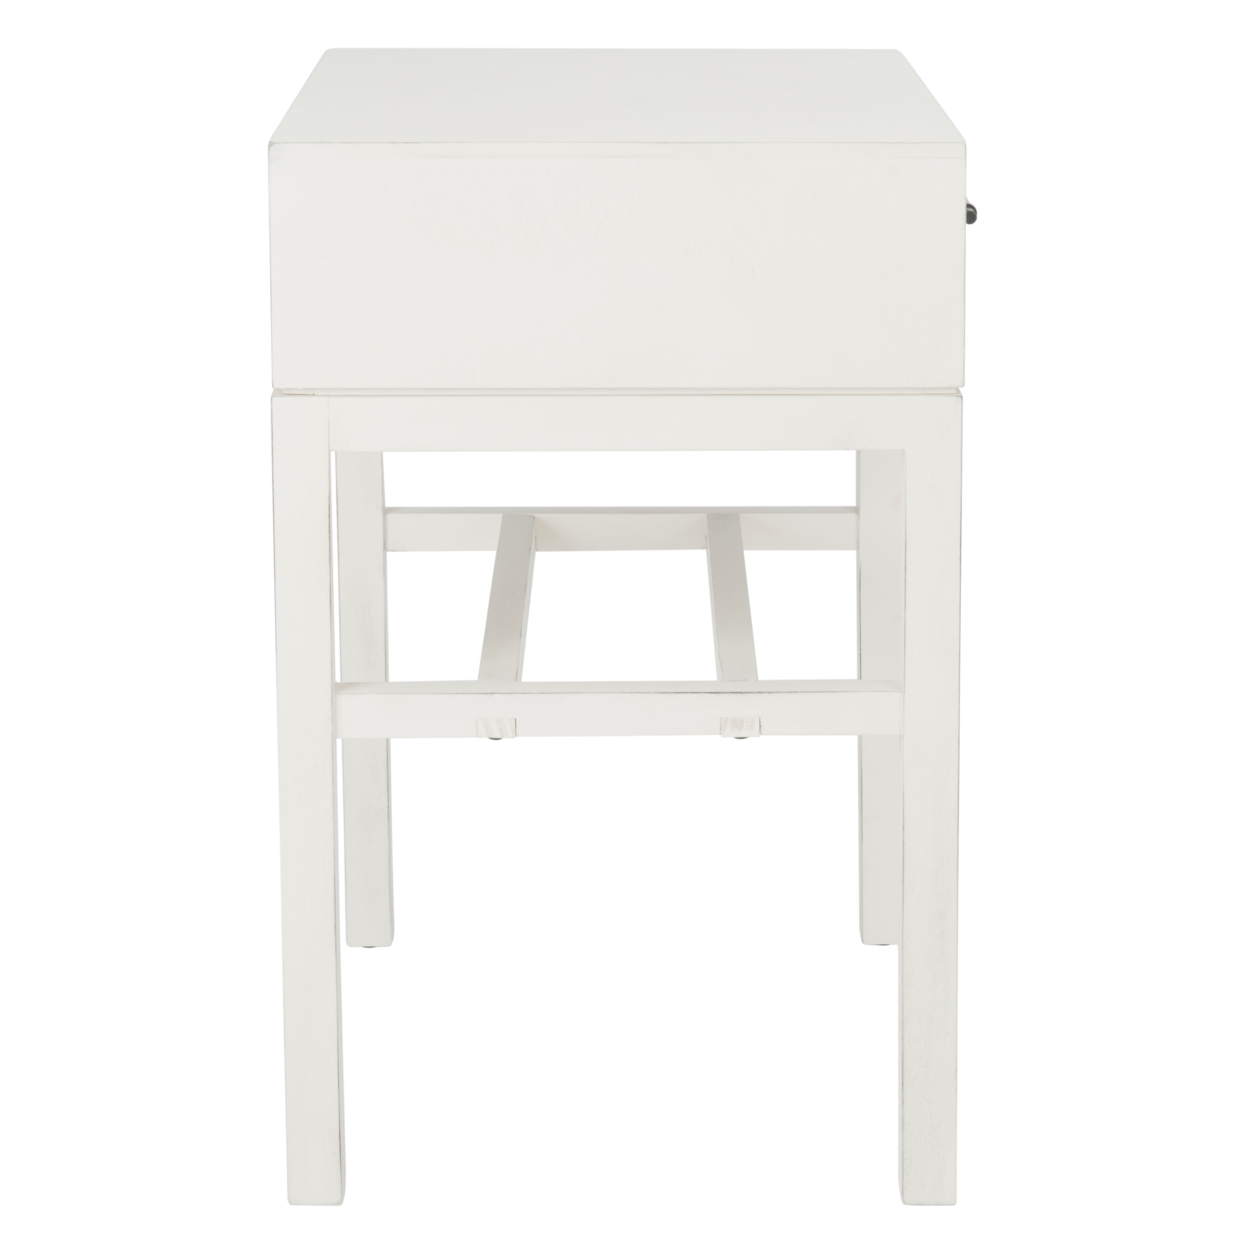 SAFAVIEH Ajana 1-Drawer Accent Table Distressed White